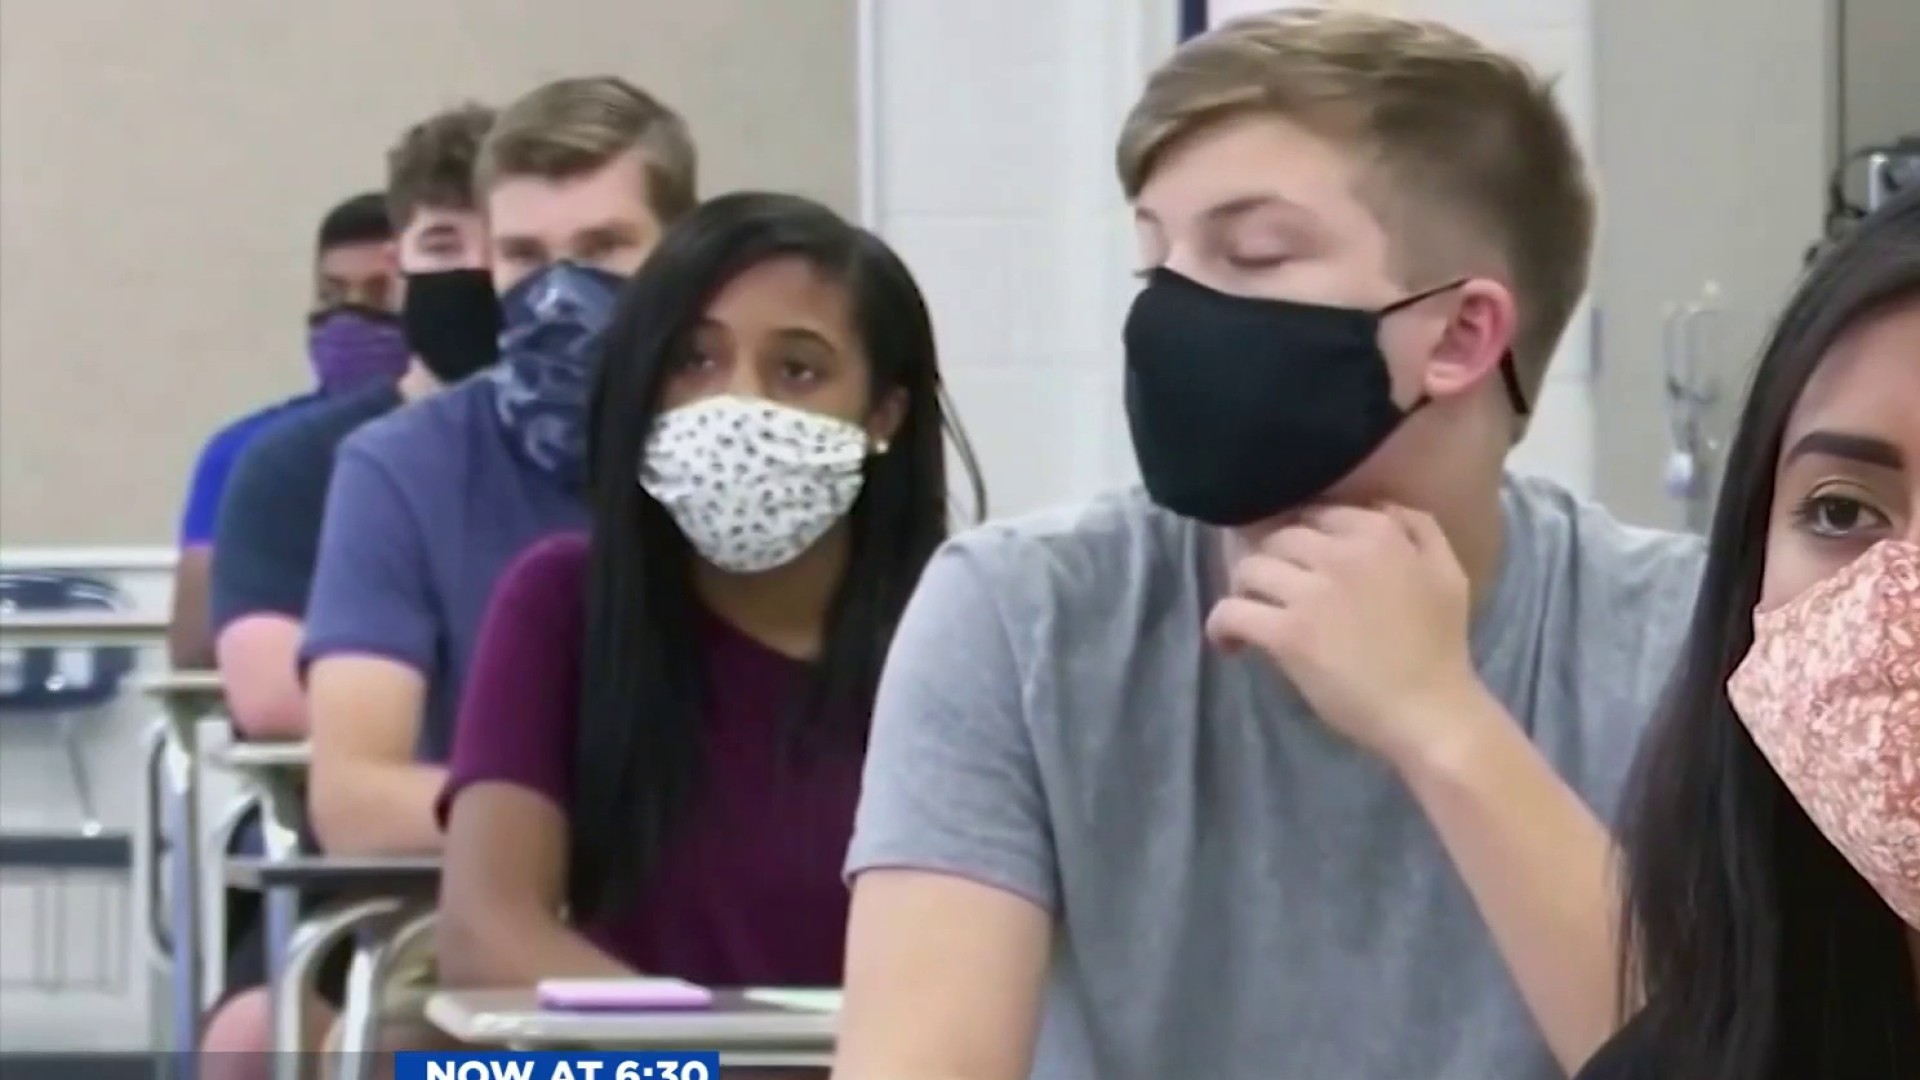 Hillsborough schools tell state: We had every right to order masks